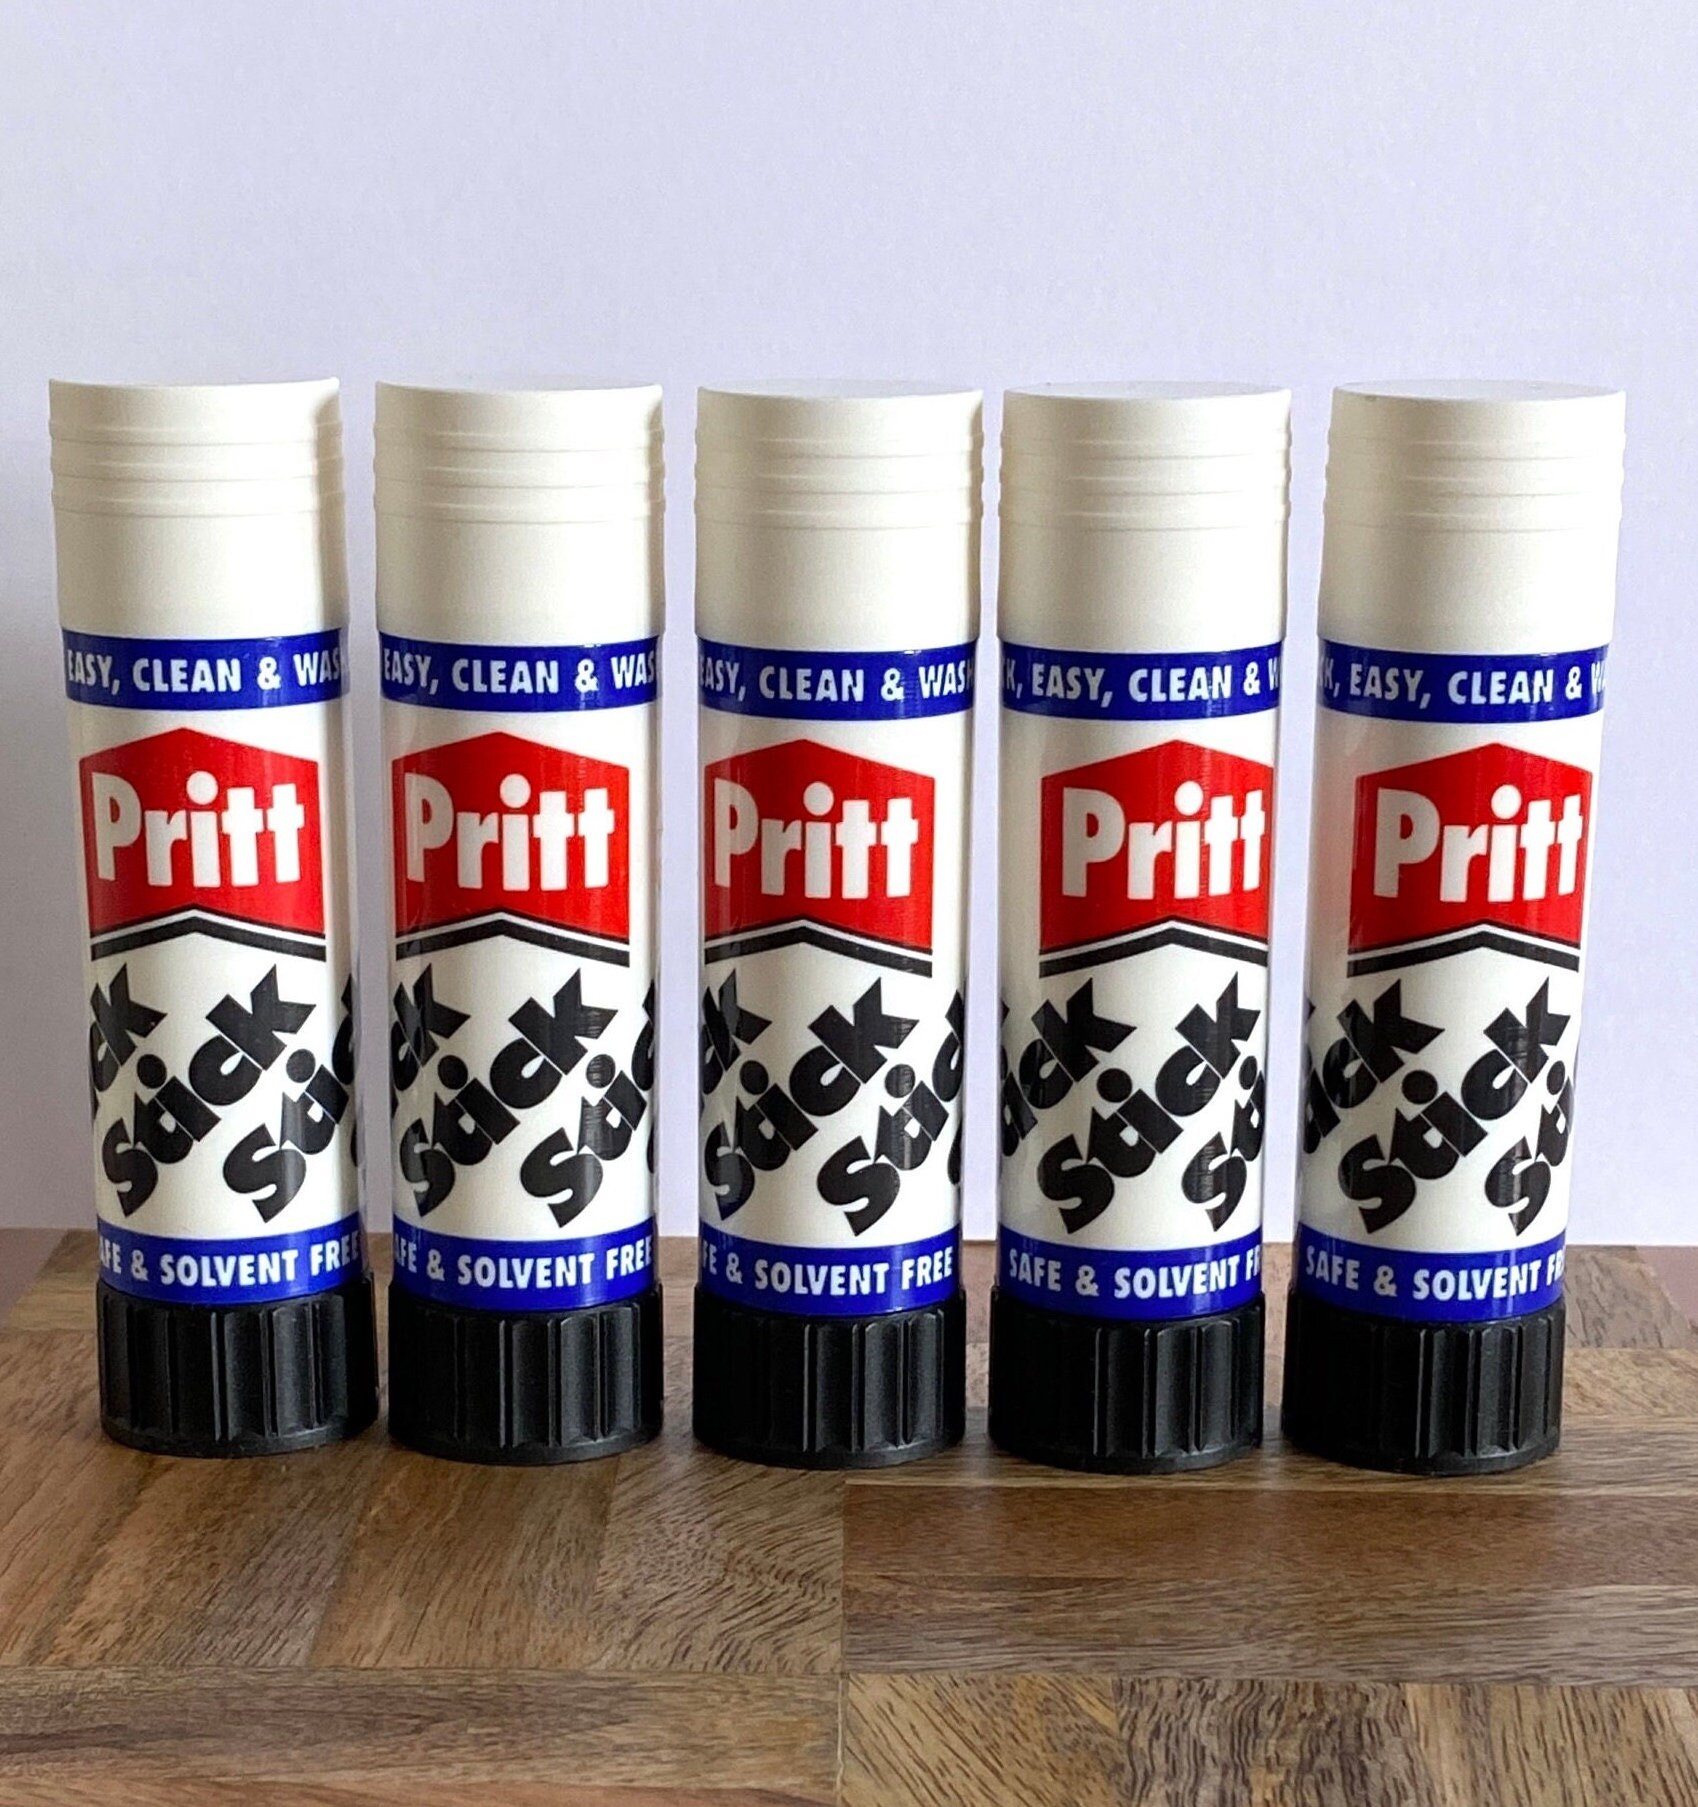 10 White Glue Sticks for Crafts and Scrapbooking and Making Drippy